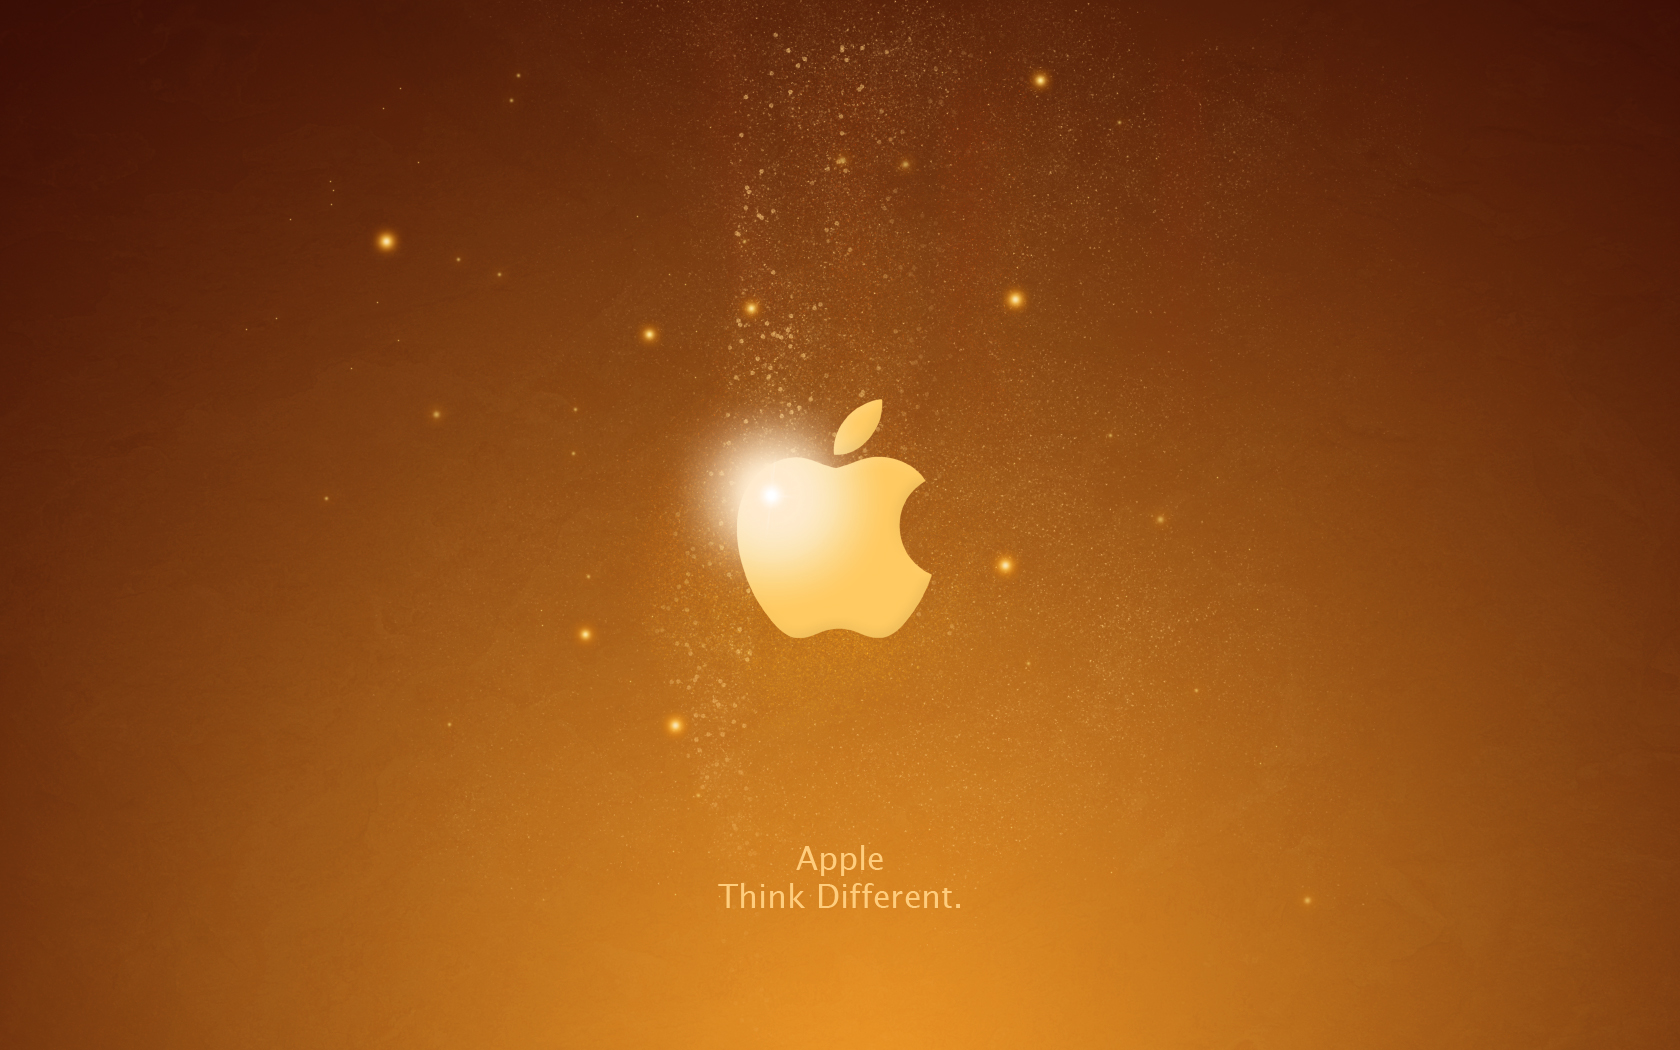 Apple 2022 Wallpaper, HD Hi-Tech 4K Wallpapers, Images and Background -  Wallpapers Den